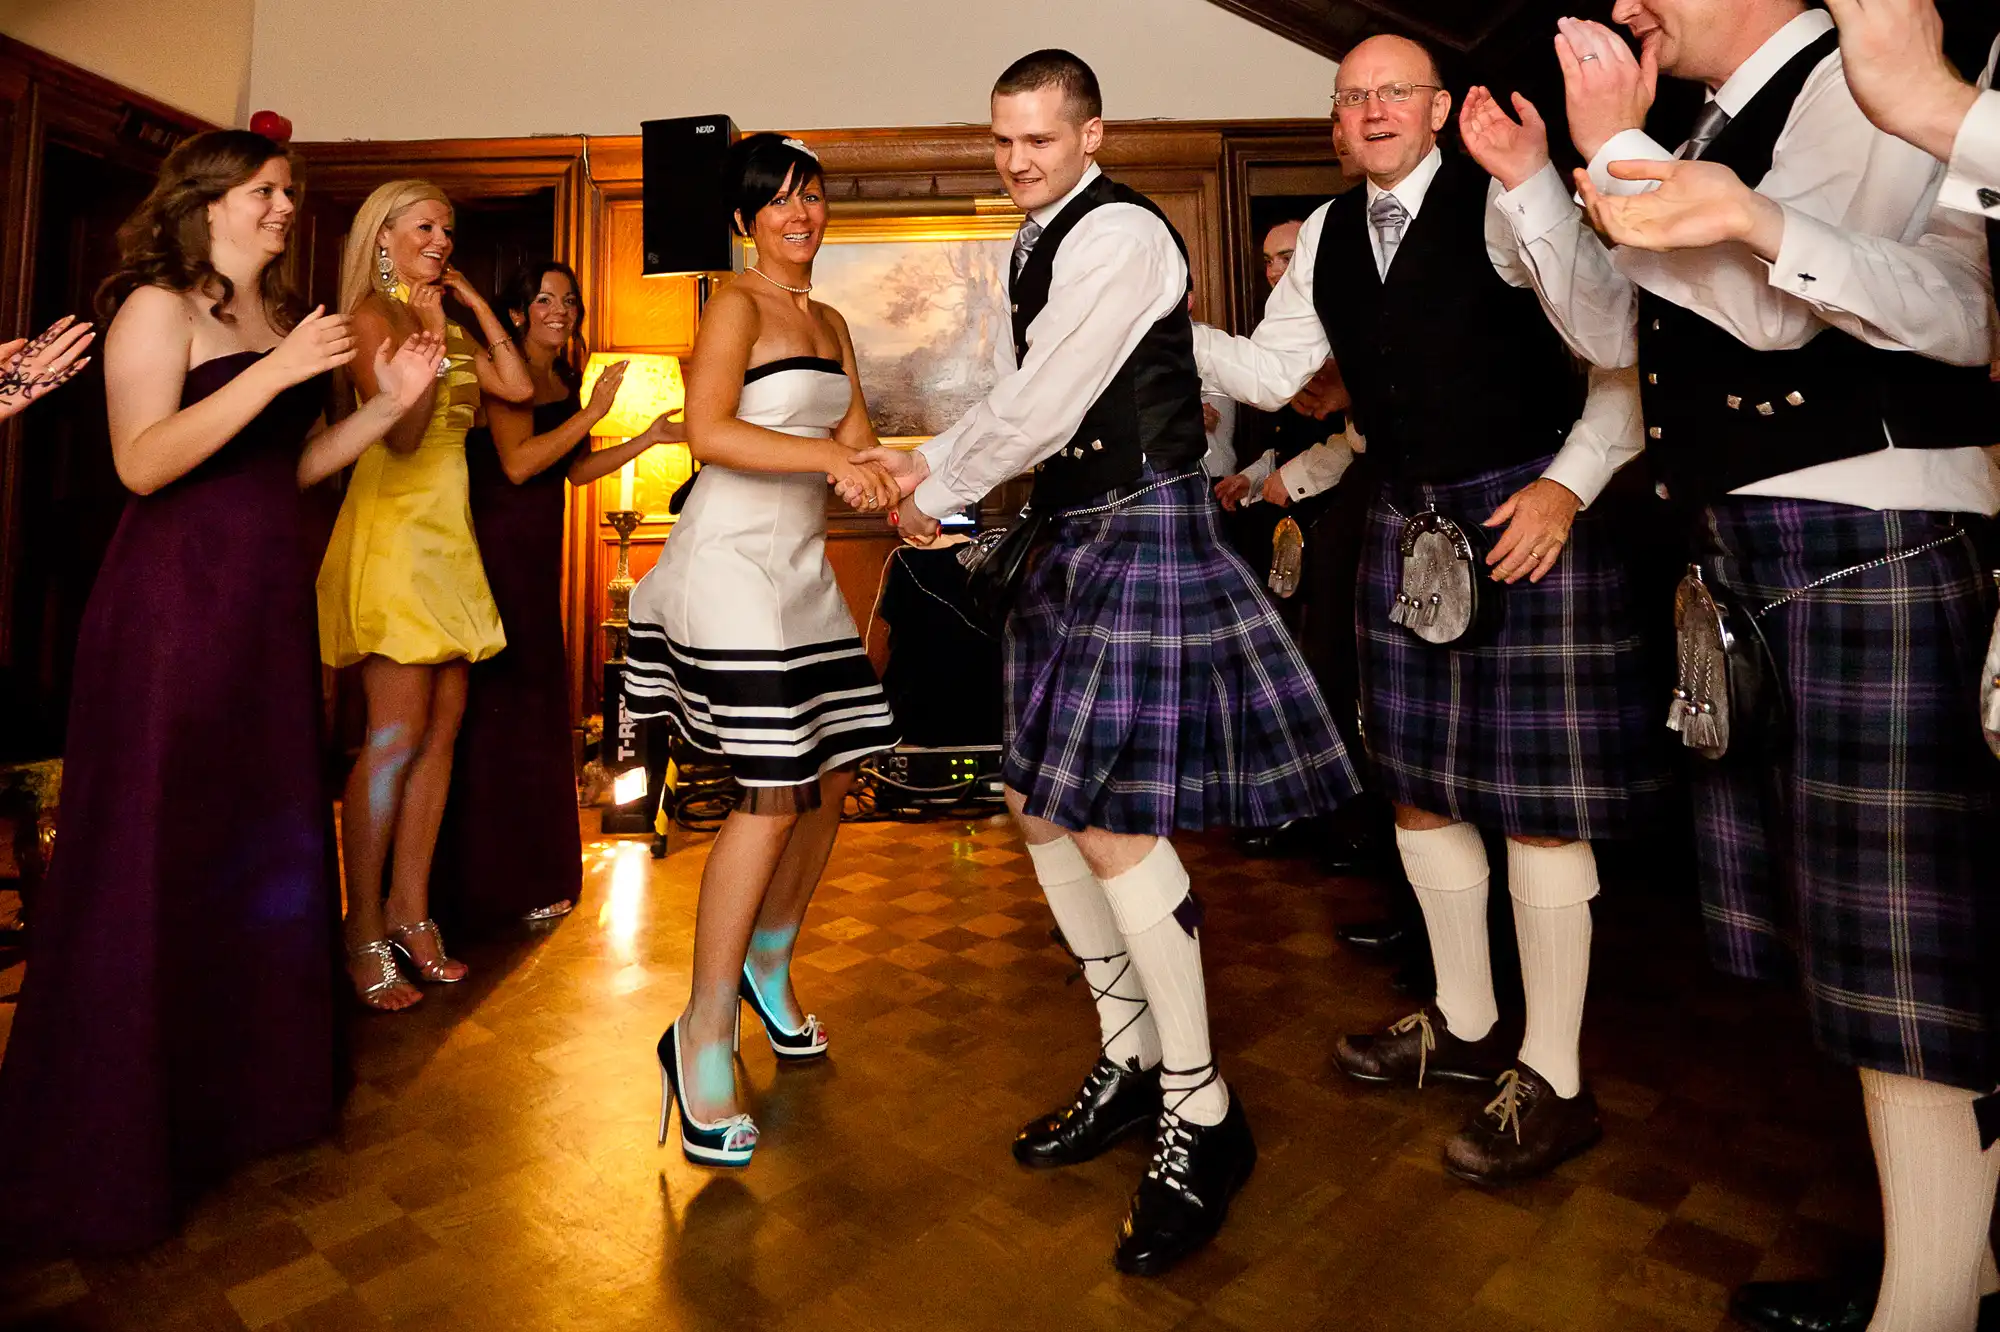 A lively dance at a scottish event with men in kilts and women in dresses, guests clapping joyfully around them.